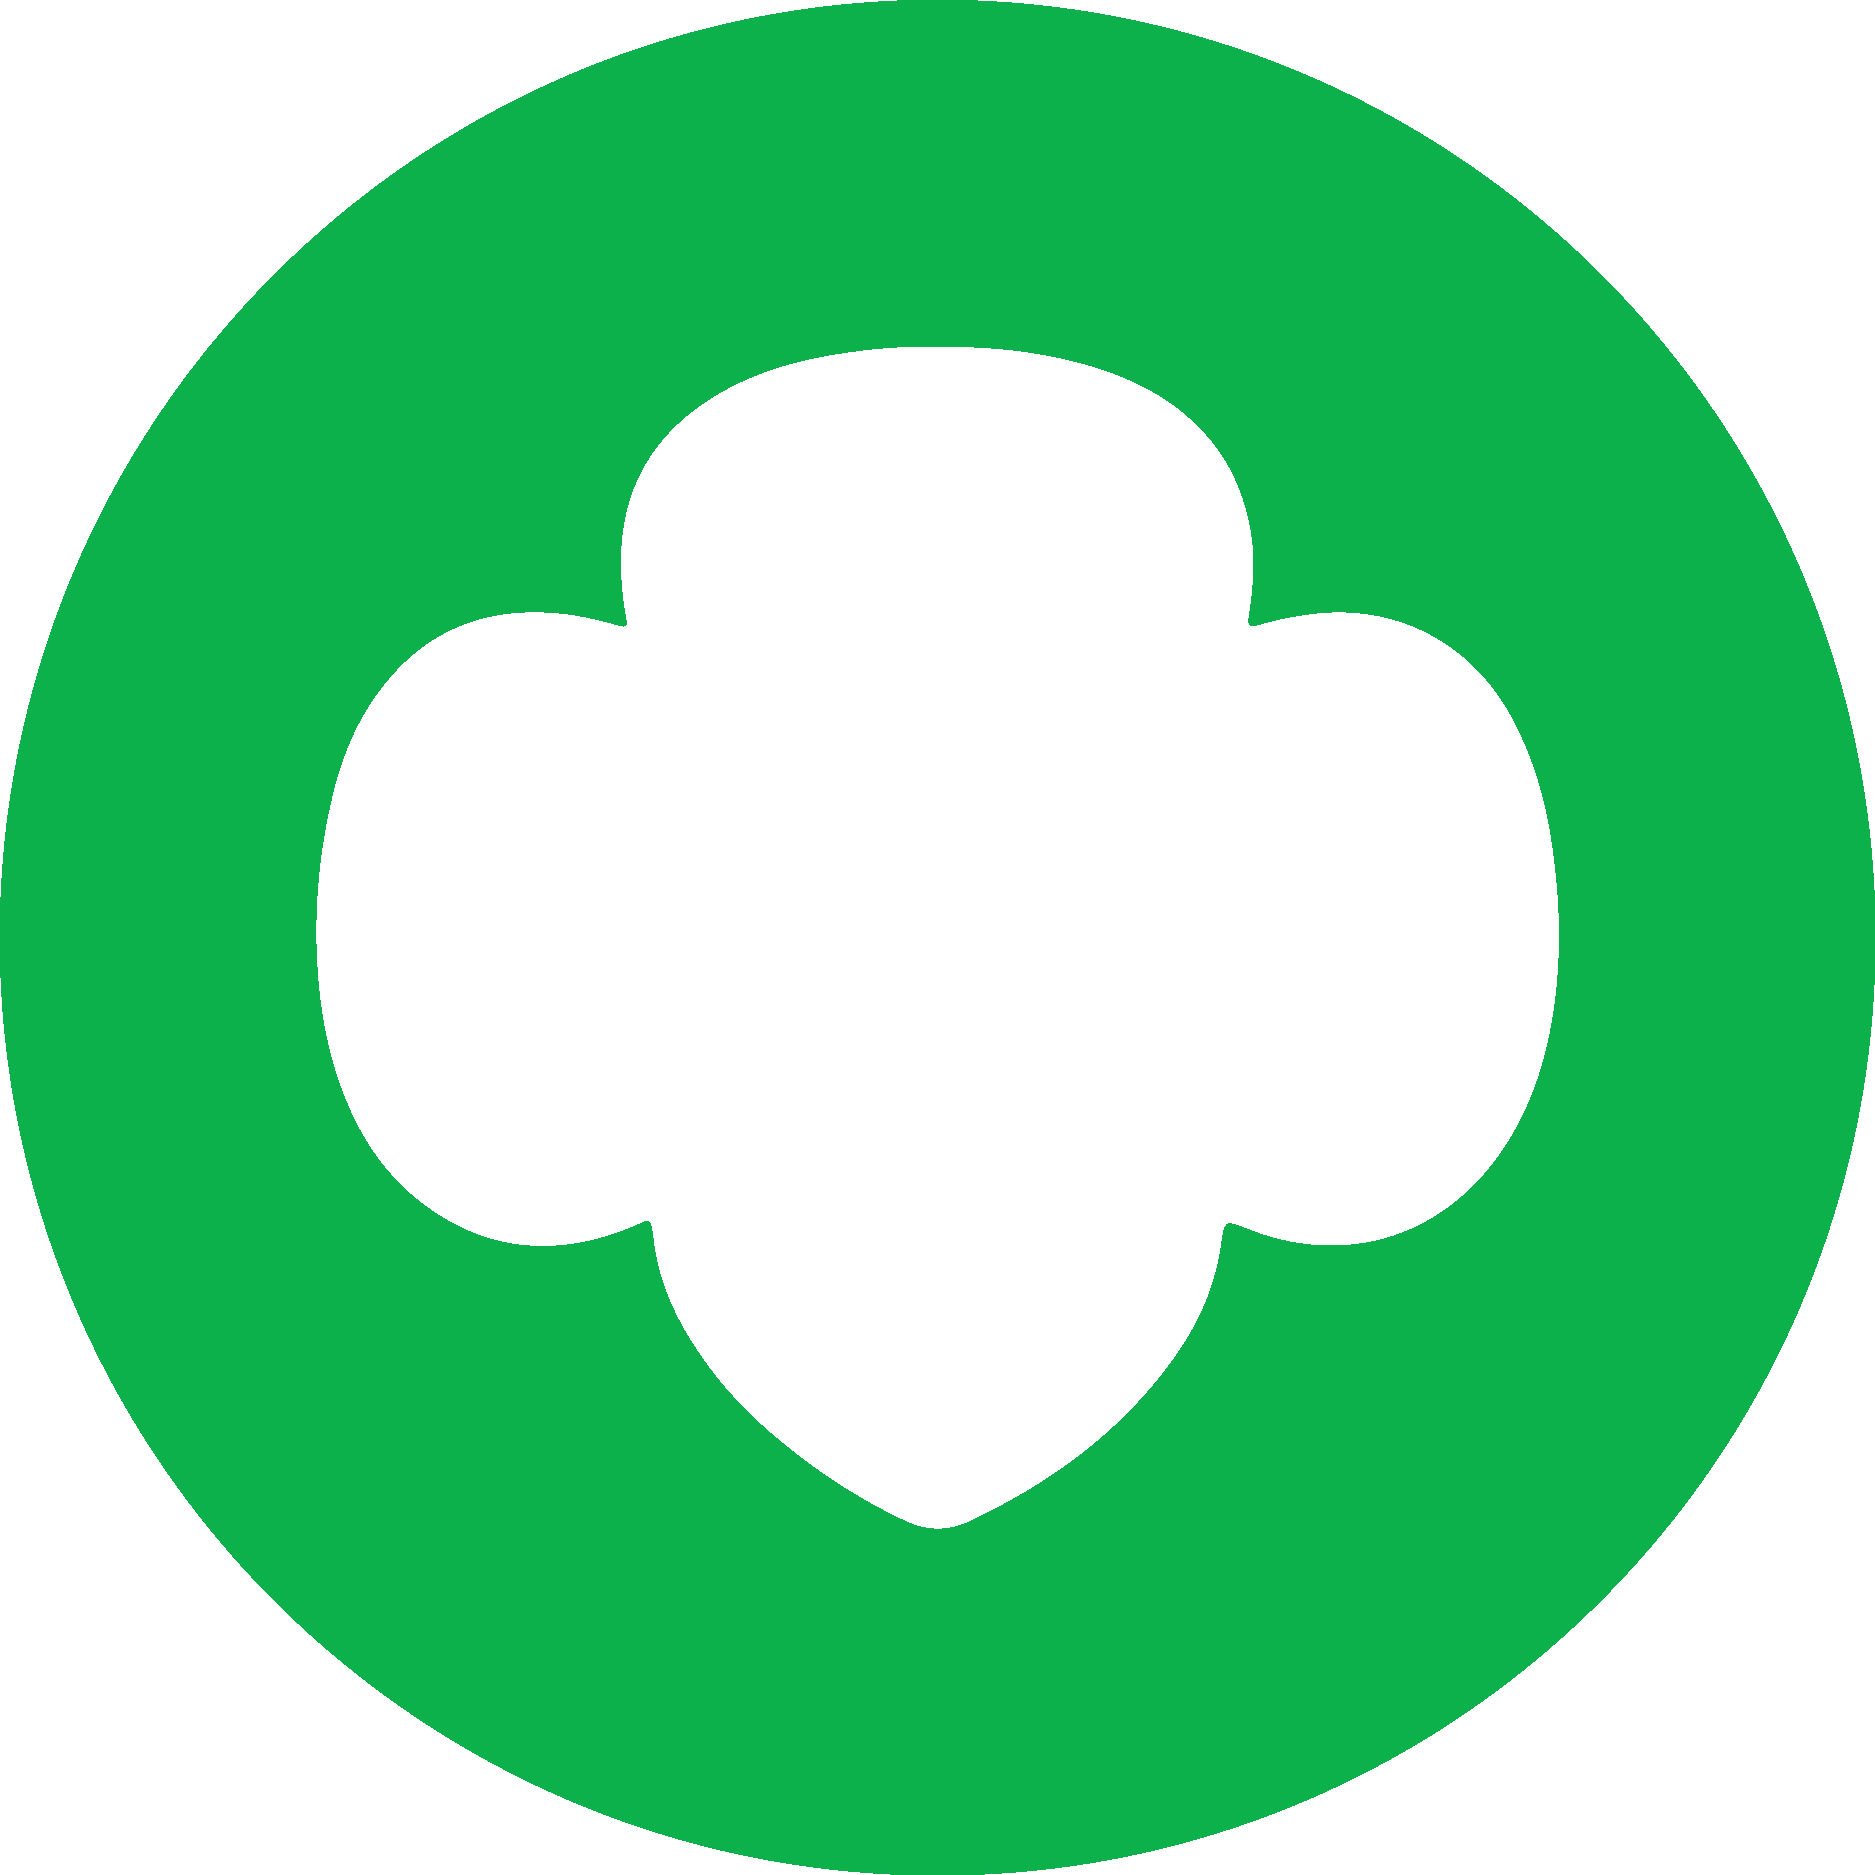 girl scout logo png